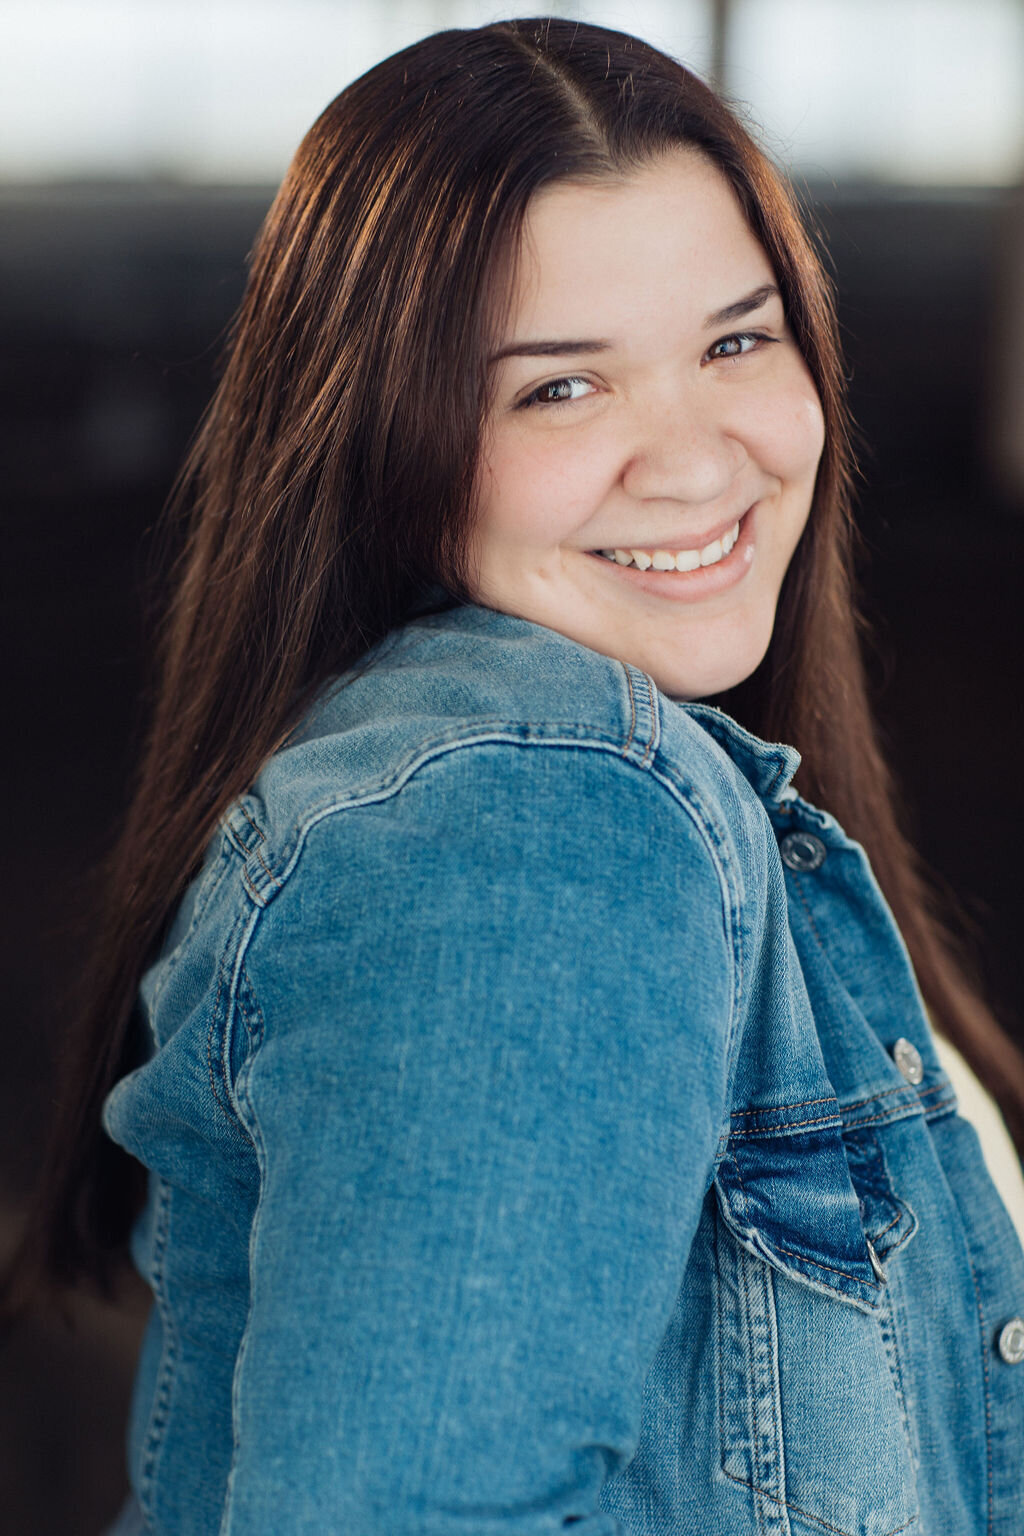 Headshot Photograph Of Young Woman In Blue Denim Jacket Los Angeles